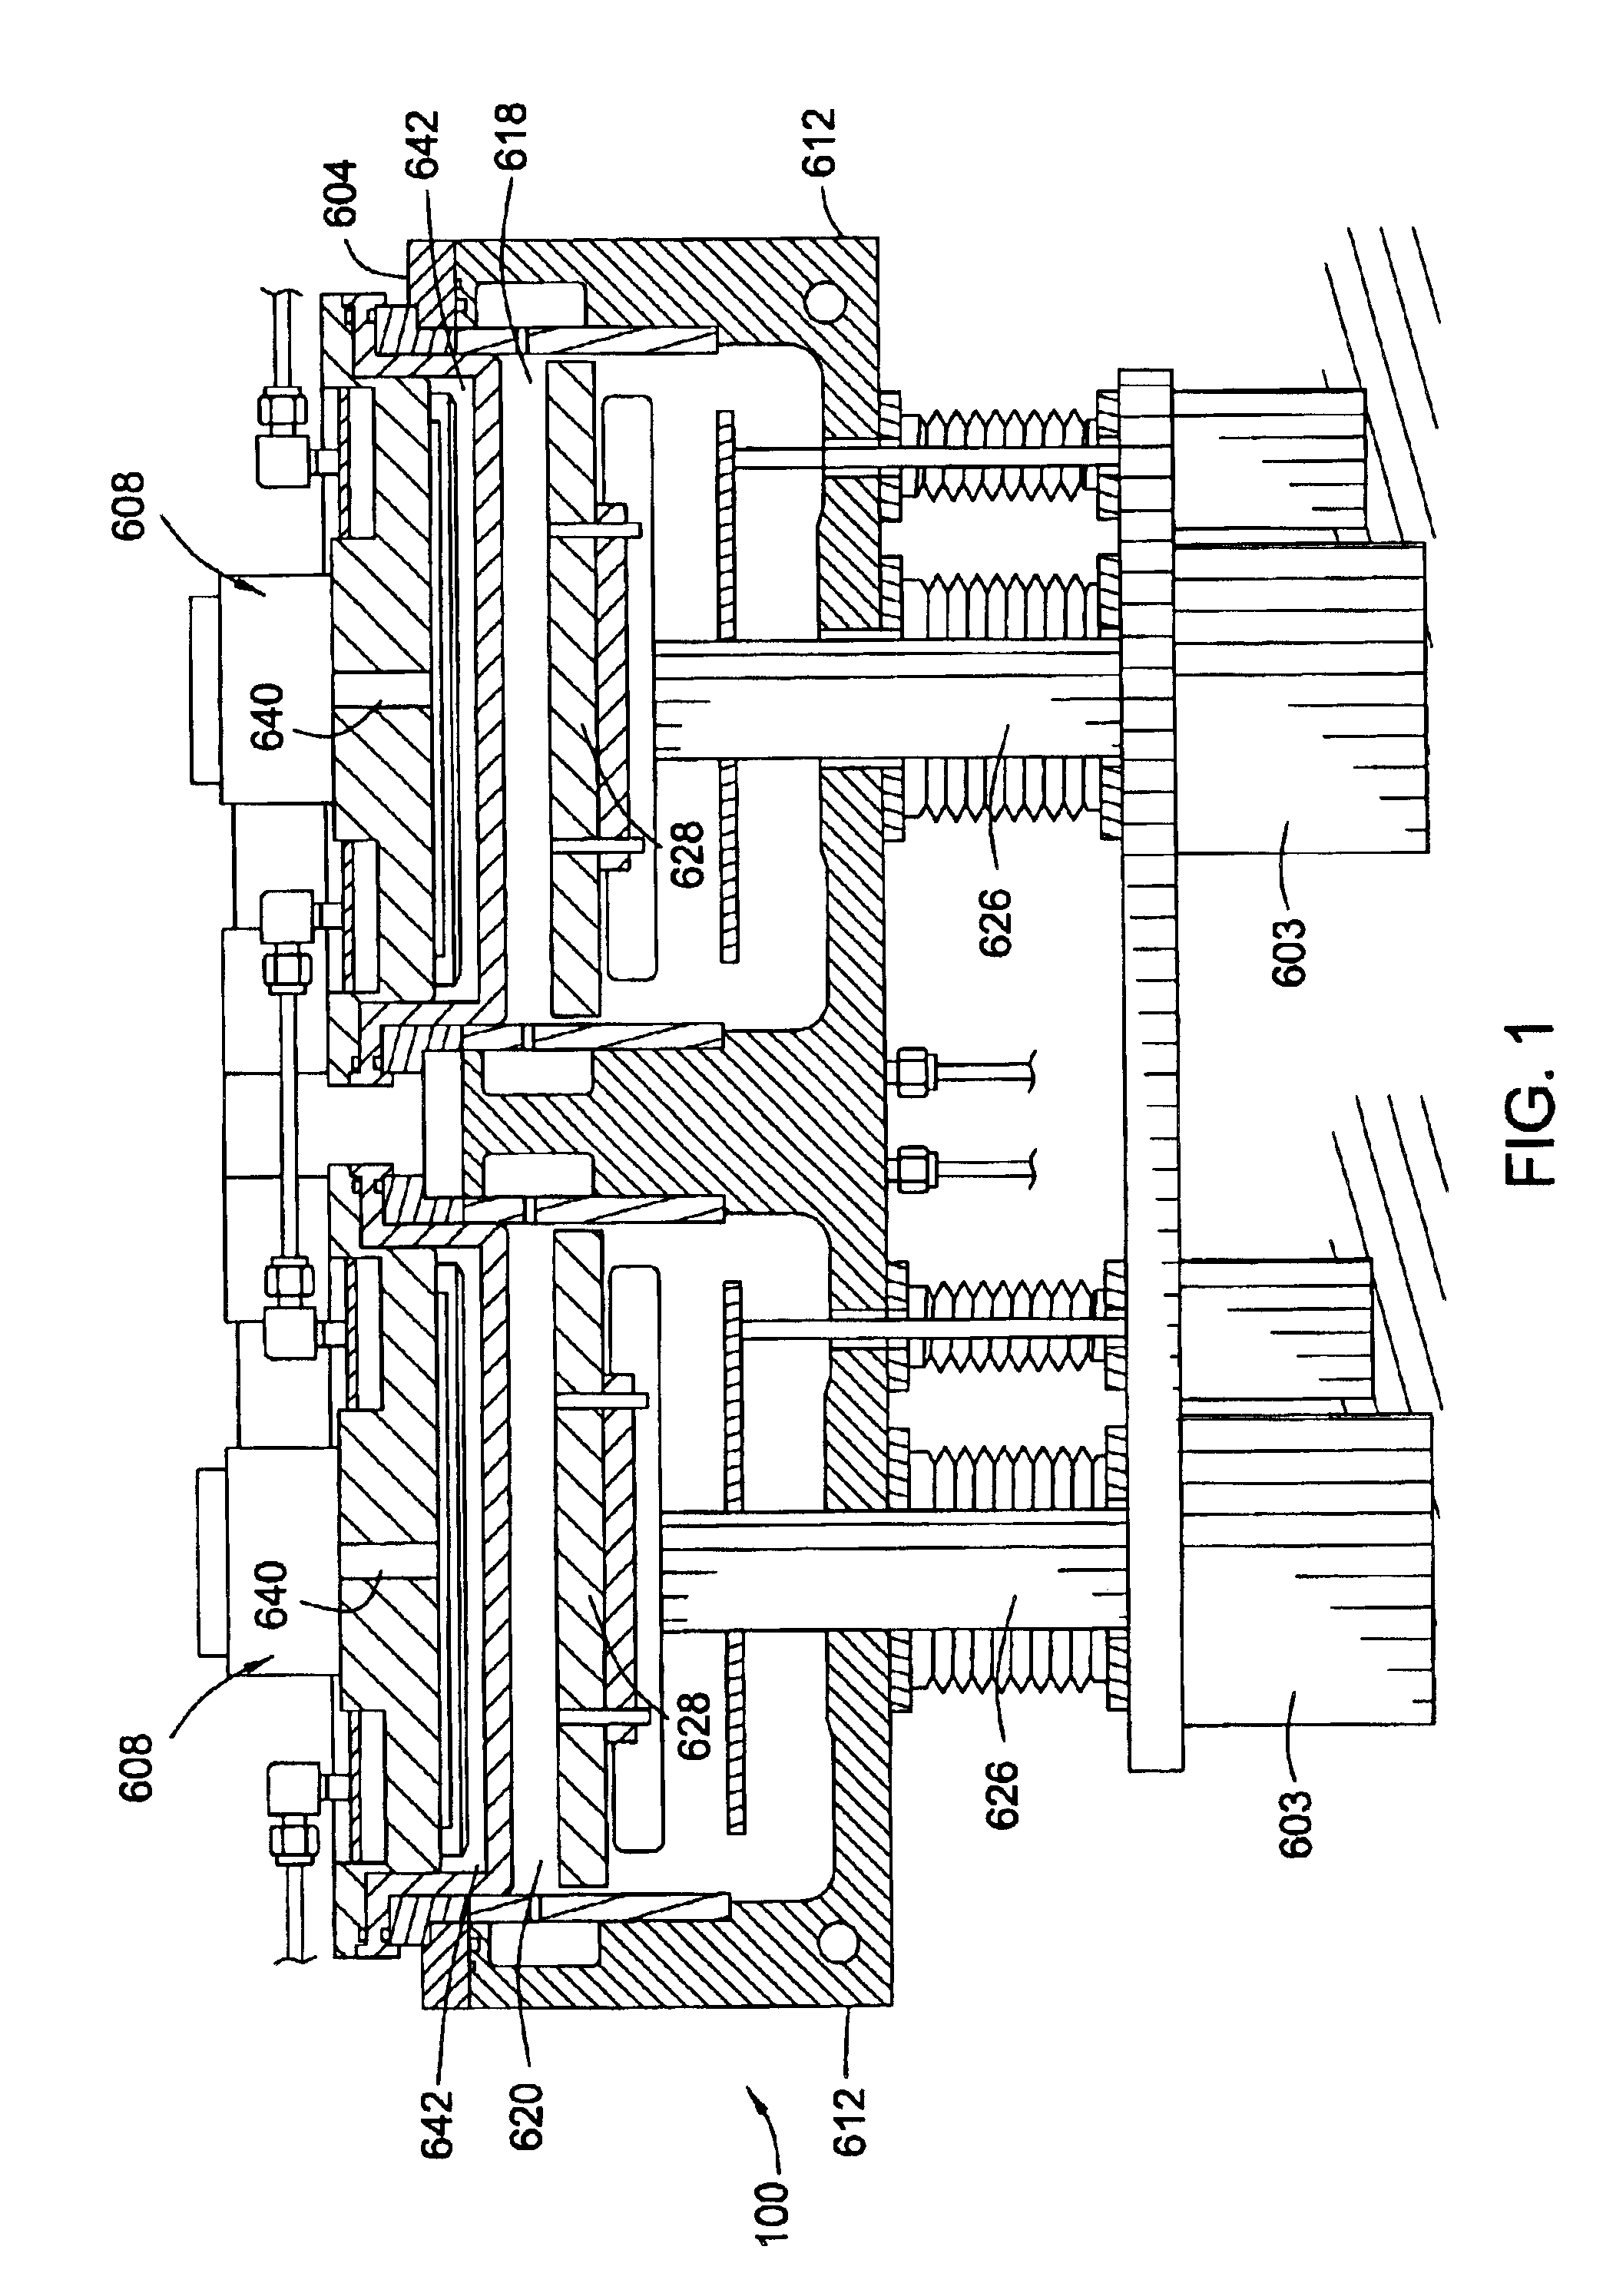 Method for producing semiconductor including forming a layer containing at least silicon carbide and forming a second layer containing at least silicon oxygen carbide